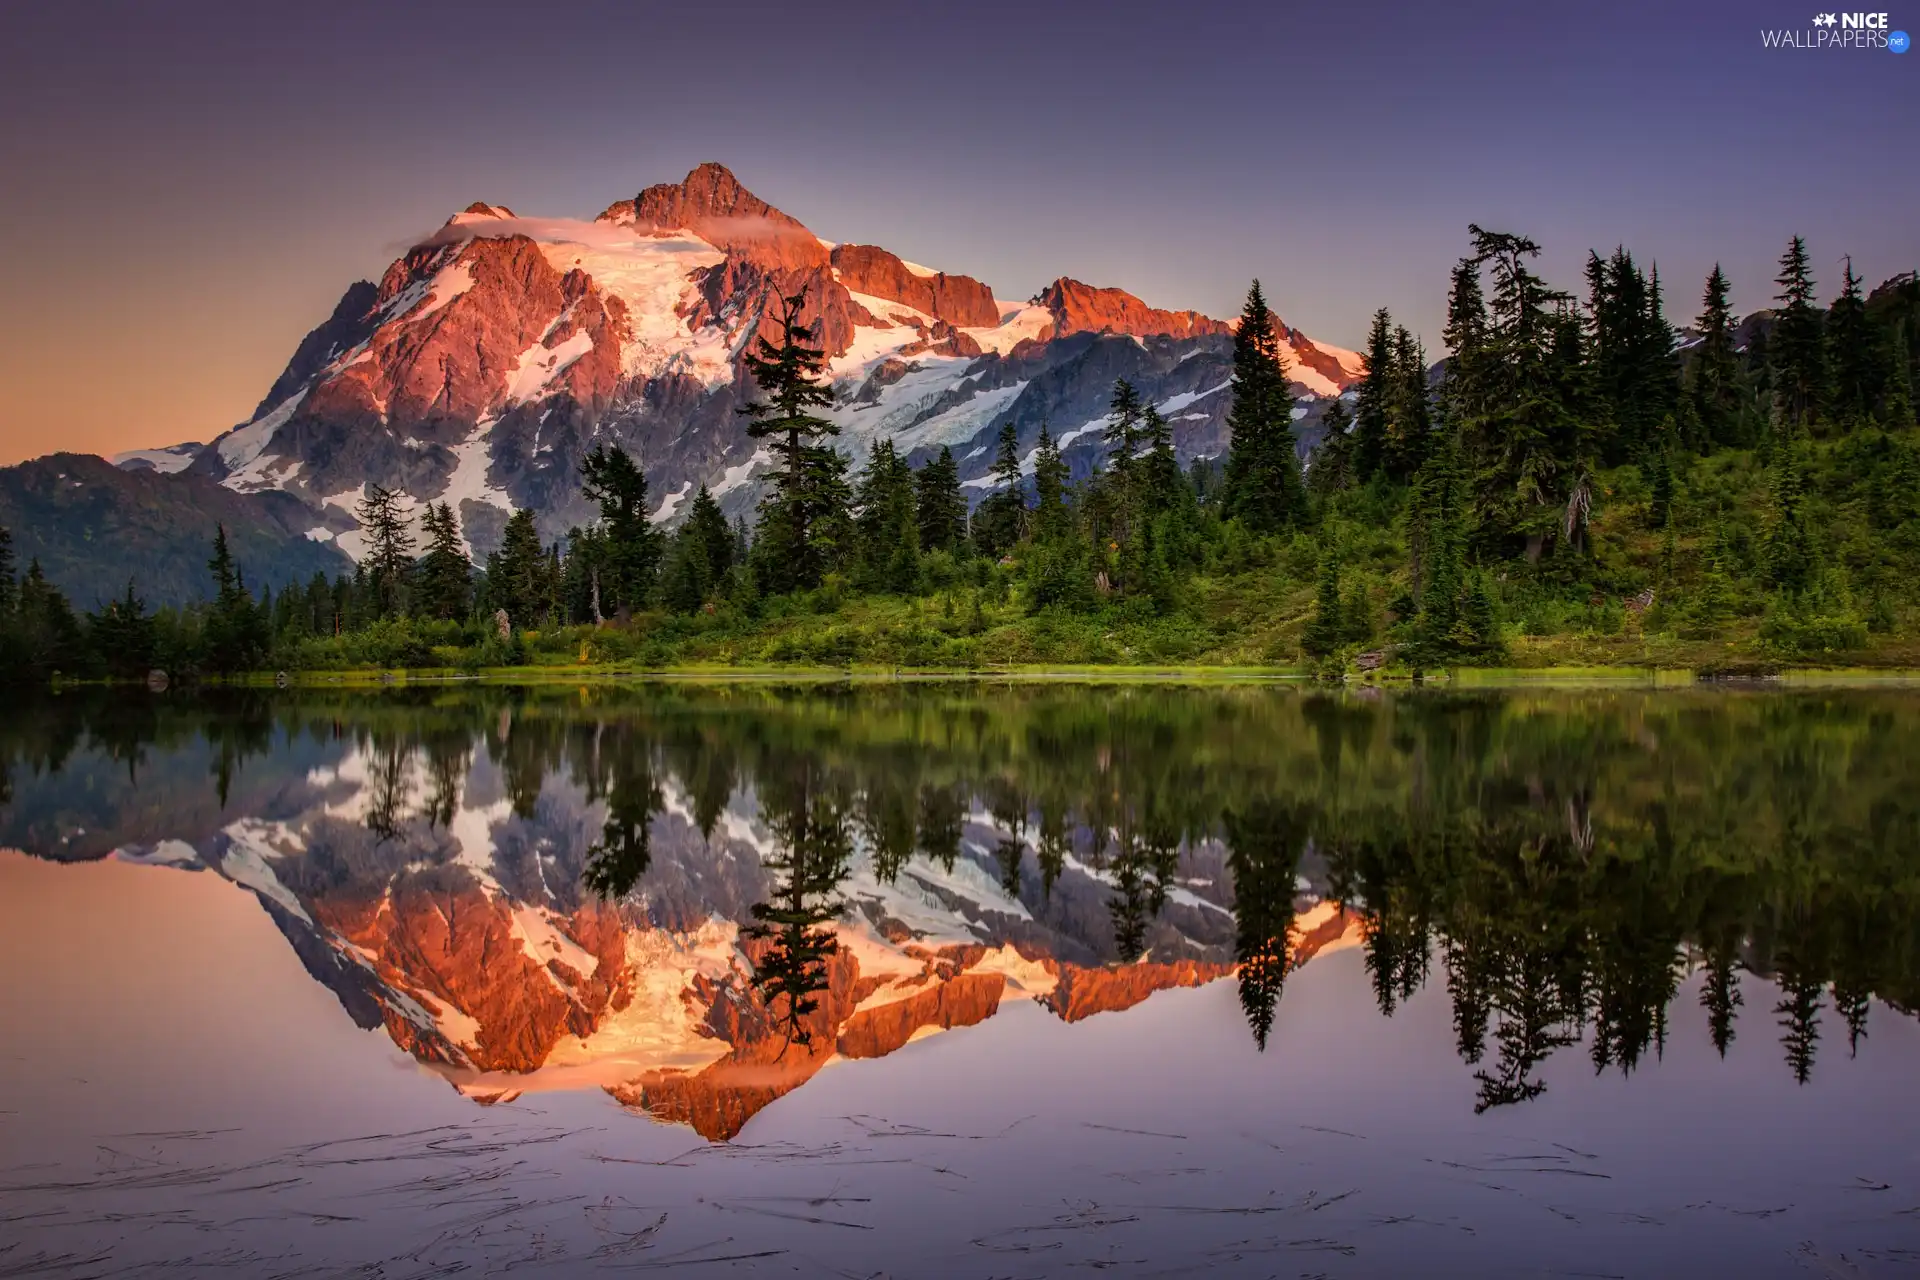 Mountains, forest, reflection, lake